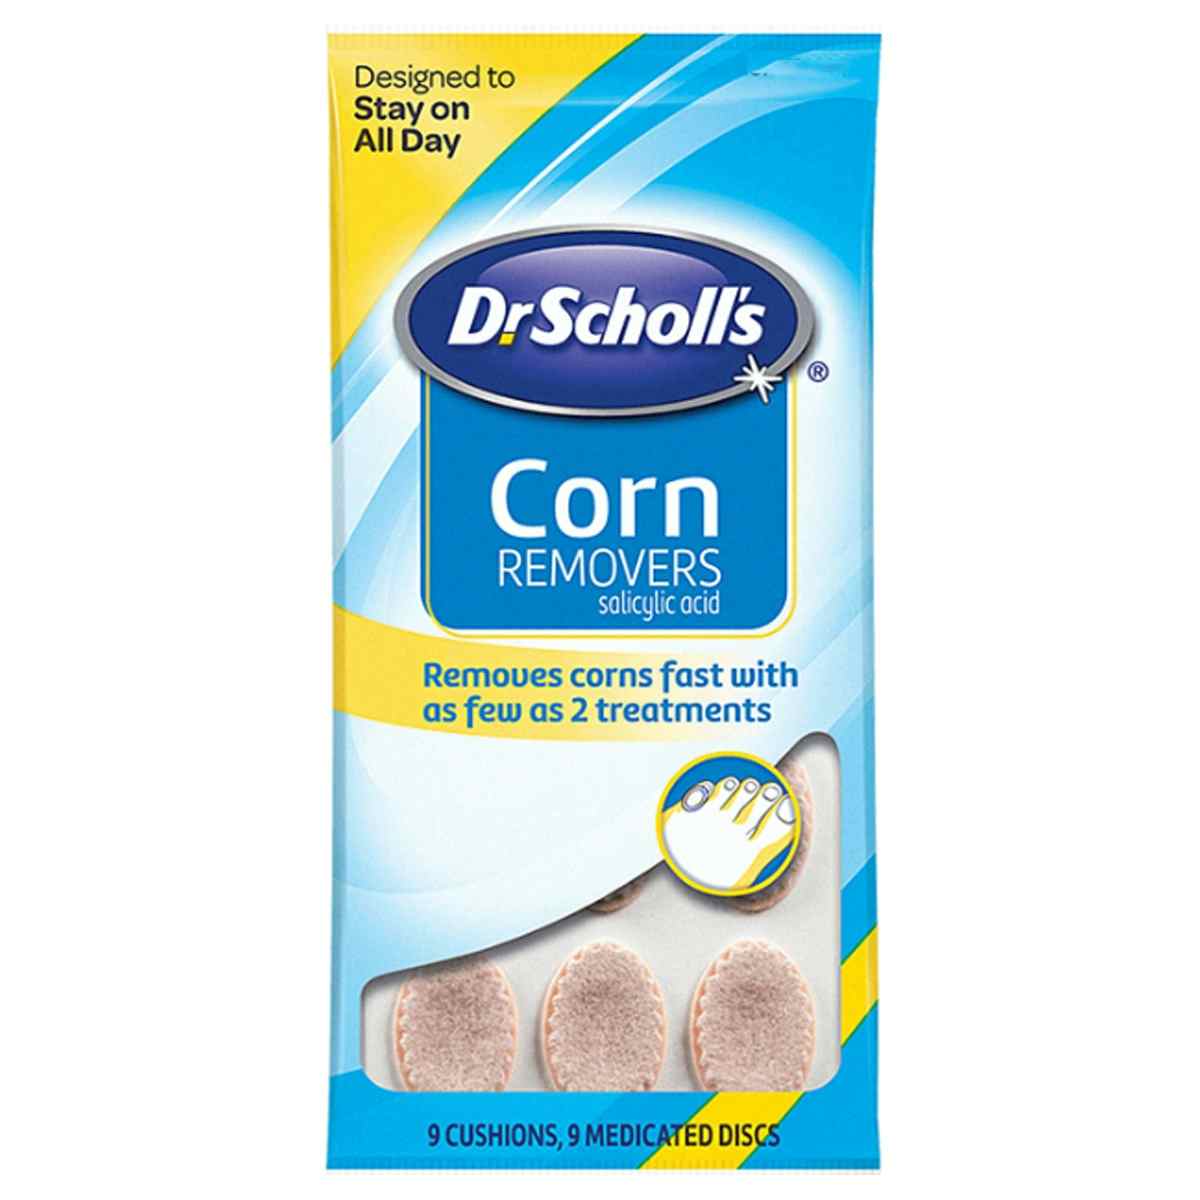 Dr Scholls Corn Removers, 86809966, Pack of 9